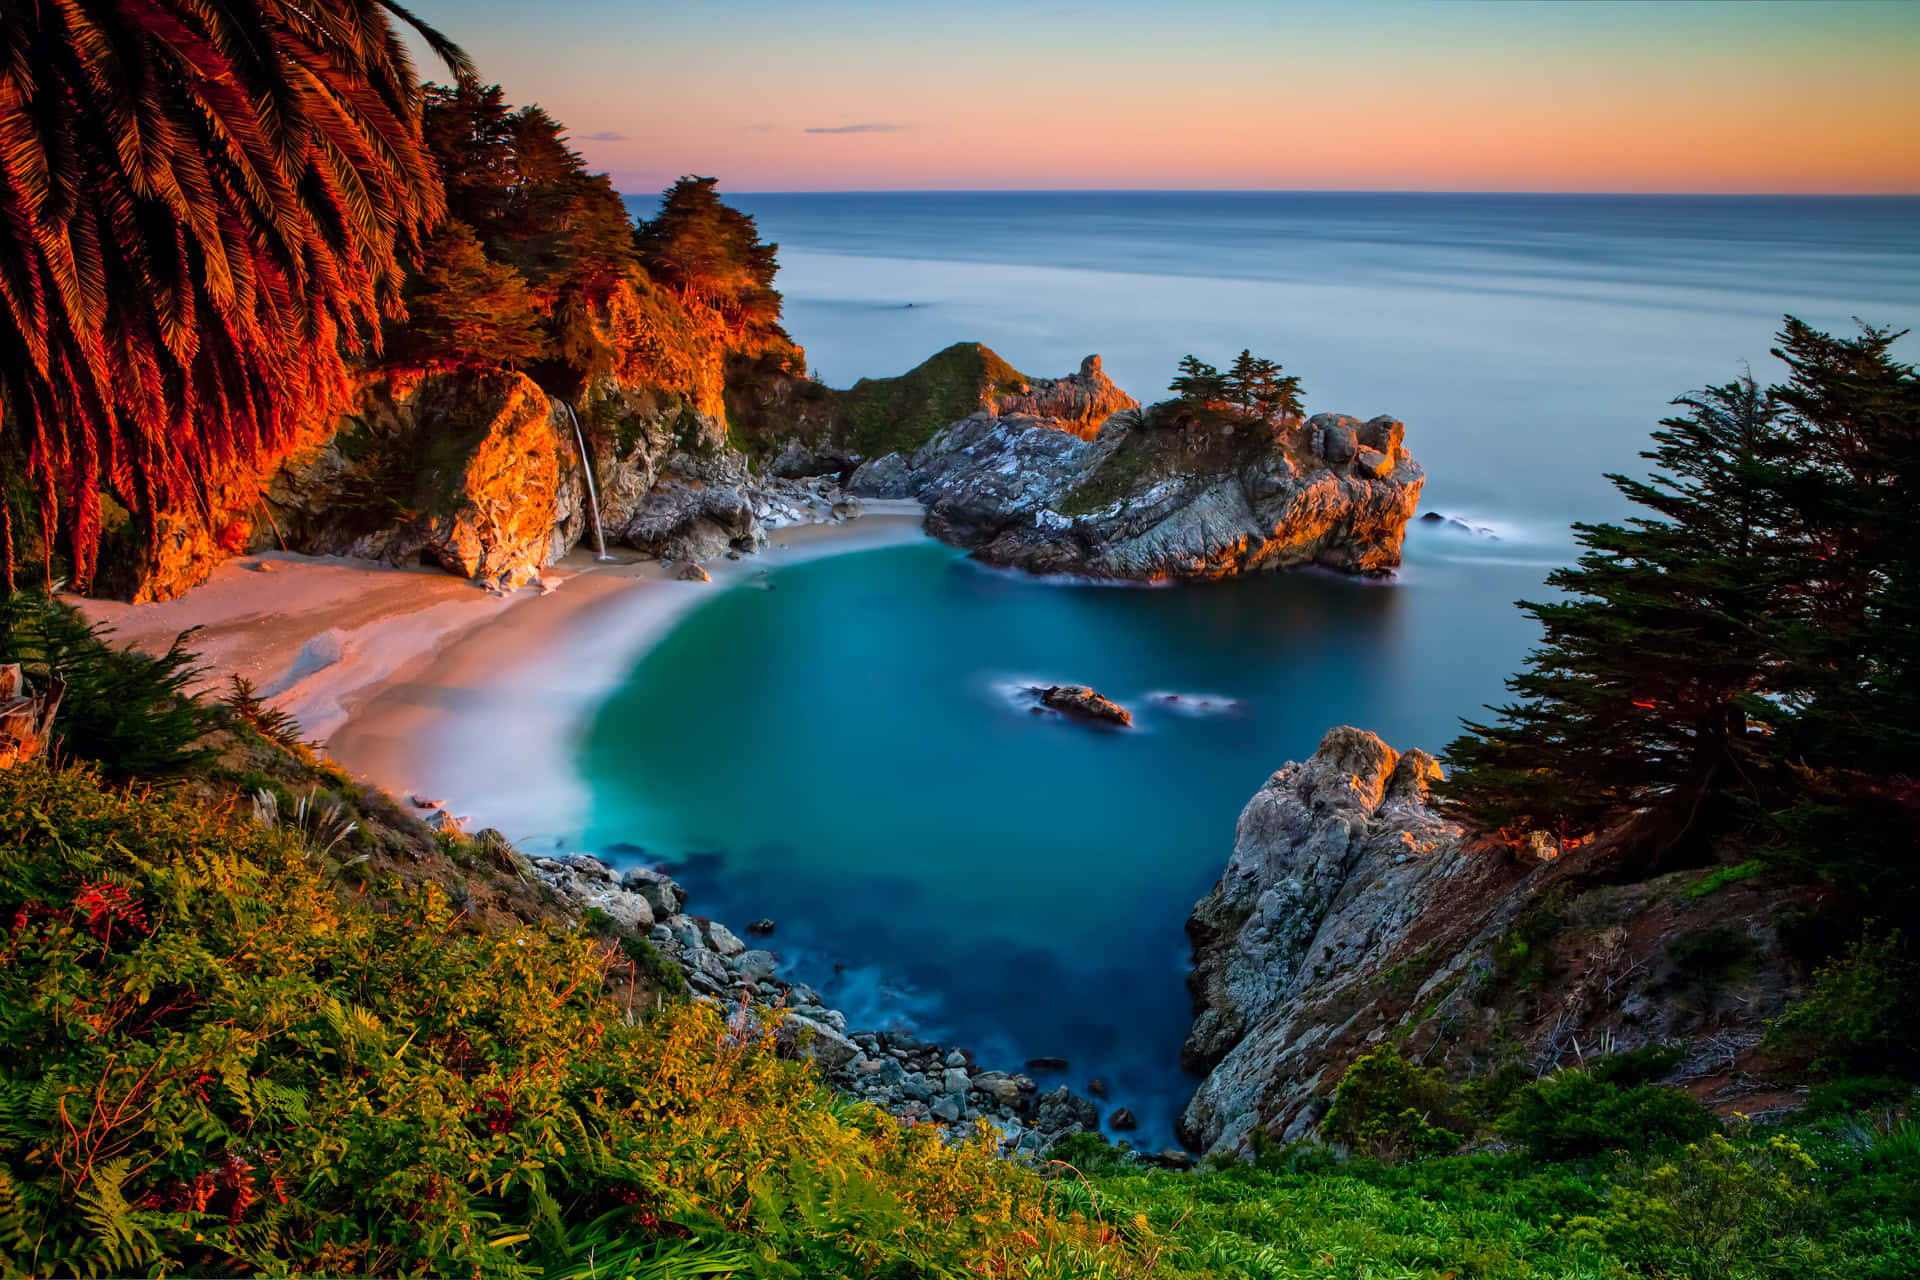 Take in the natural beauty of Big Sur!